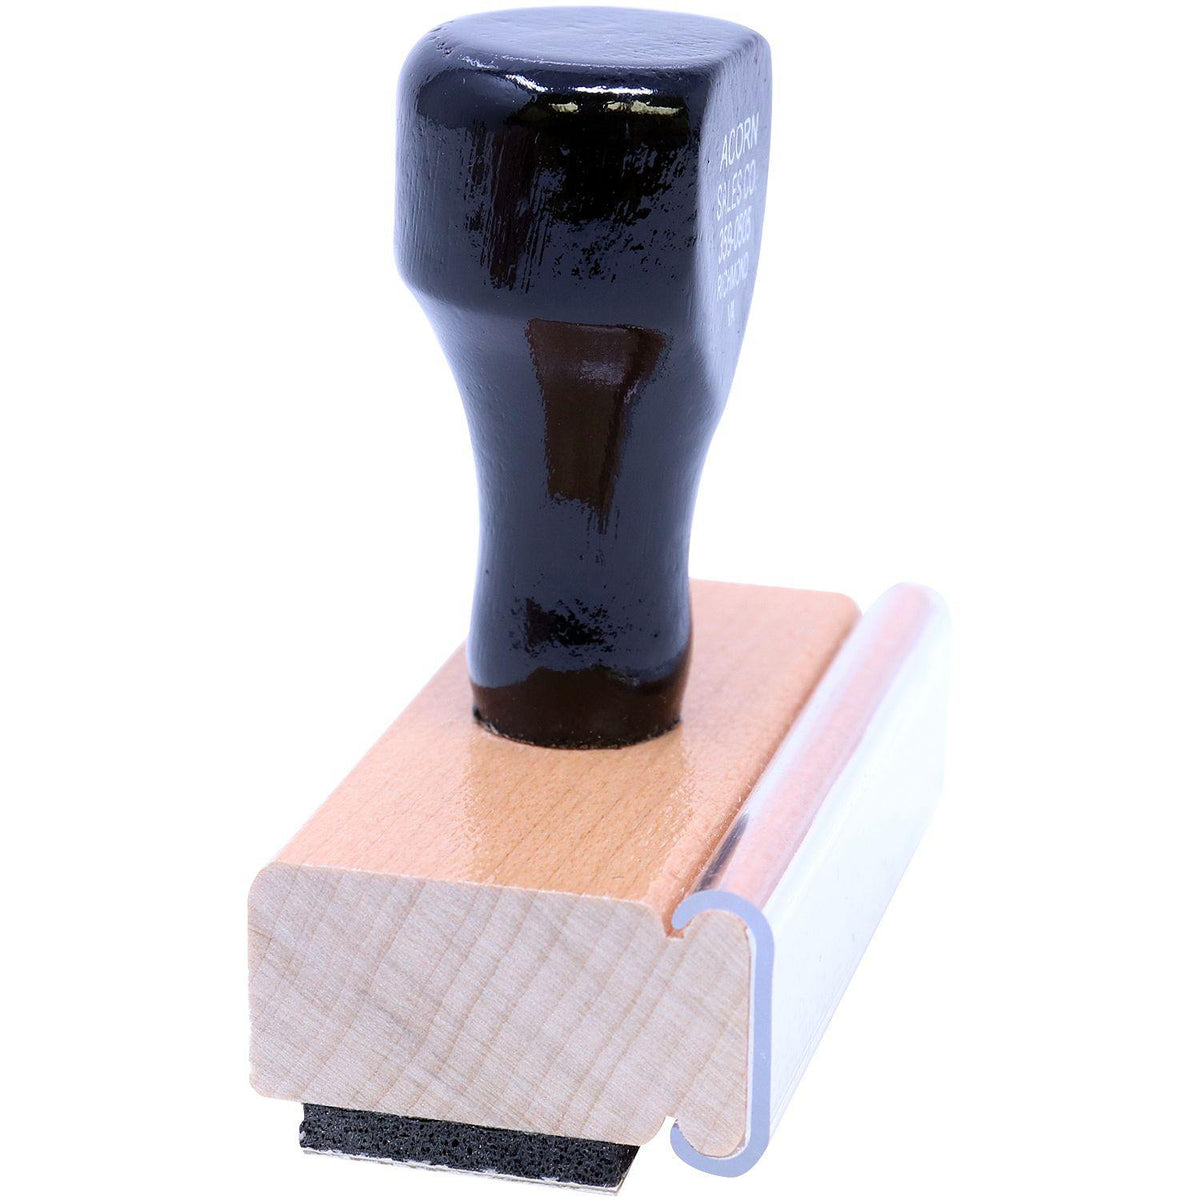 Large Social Distancing 6 Feet Rubber Stamp - Engineer Seal Stamps - Brand_Acorn, Impression Size_Large, Stamp Type_Regular Stamp, Type of Use_General, Type of Use_Medical Office